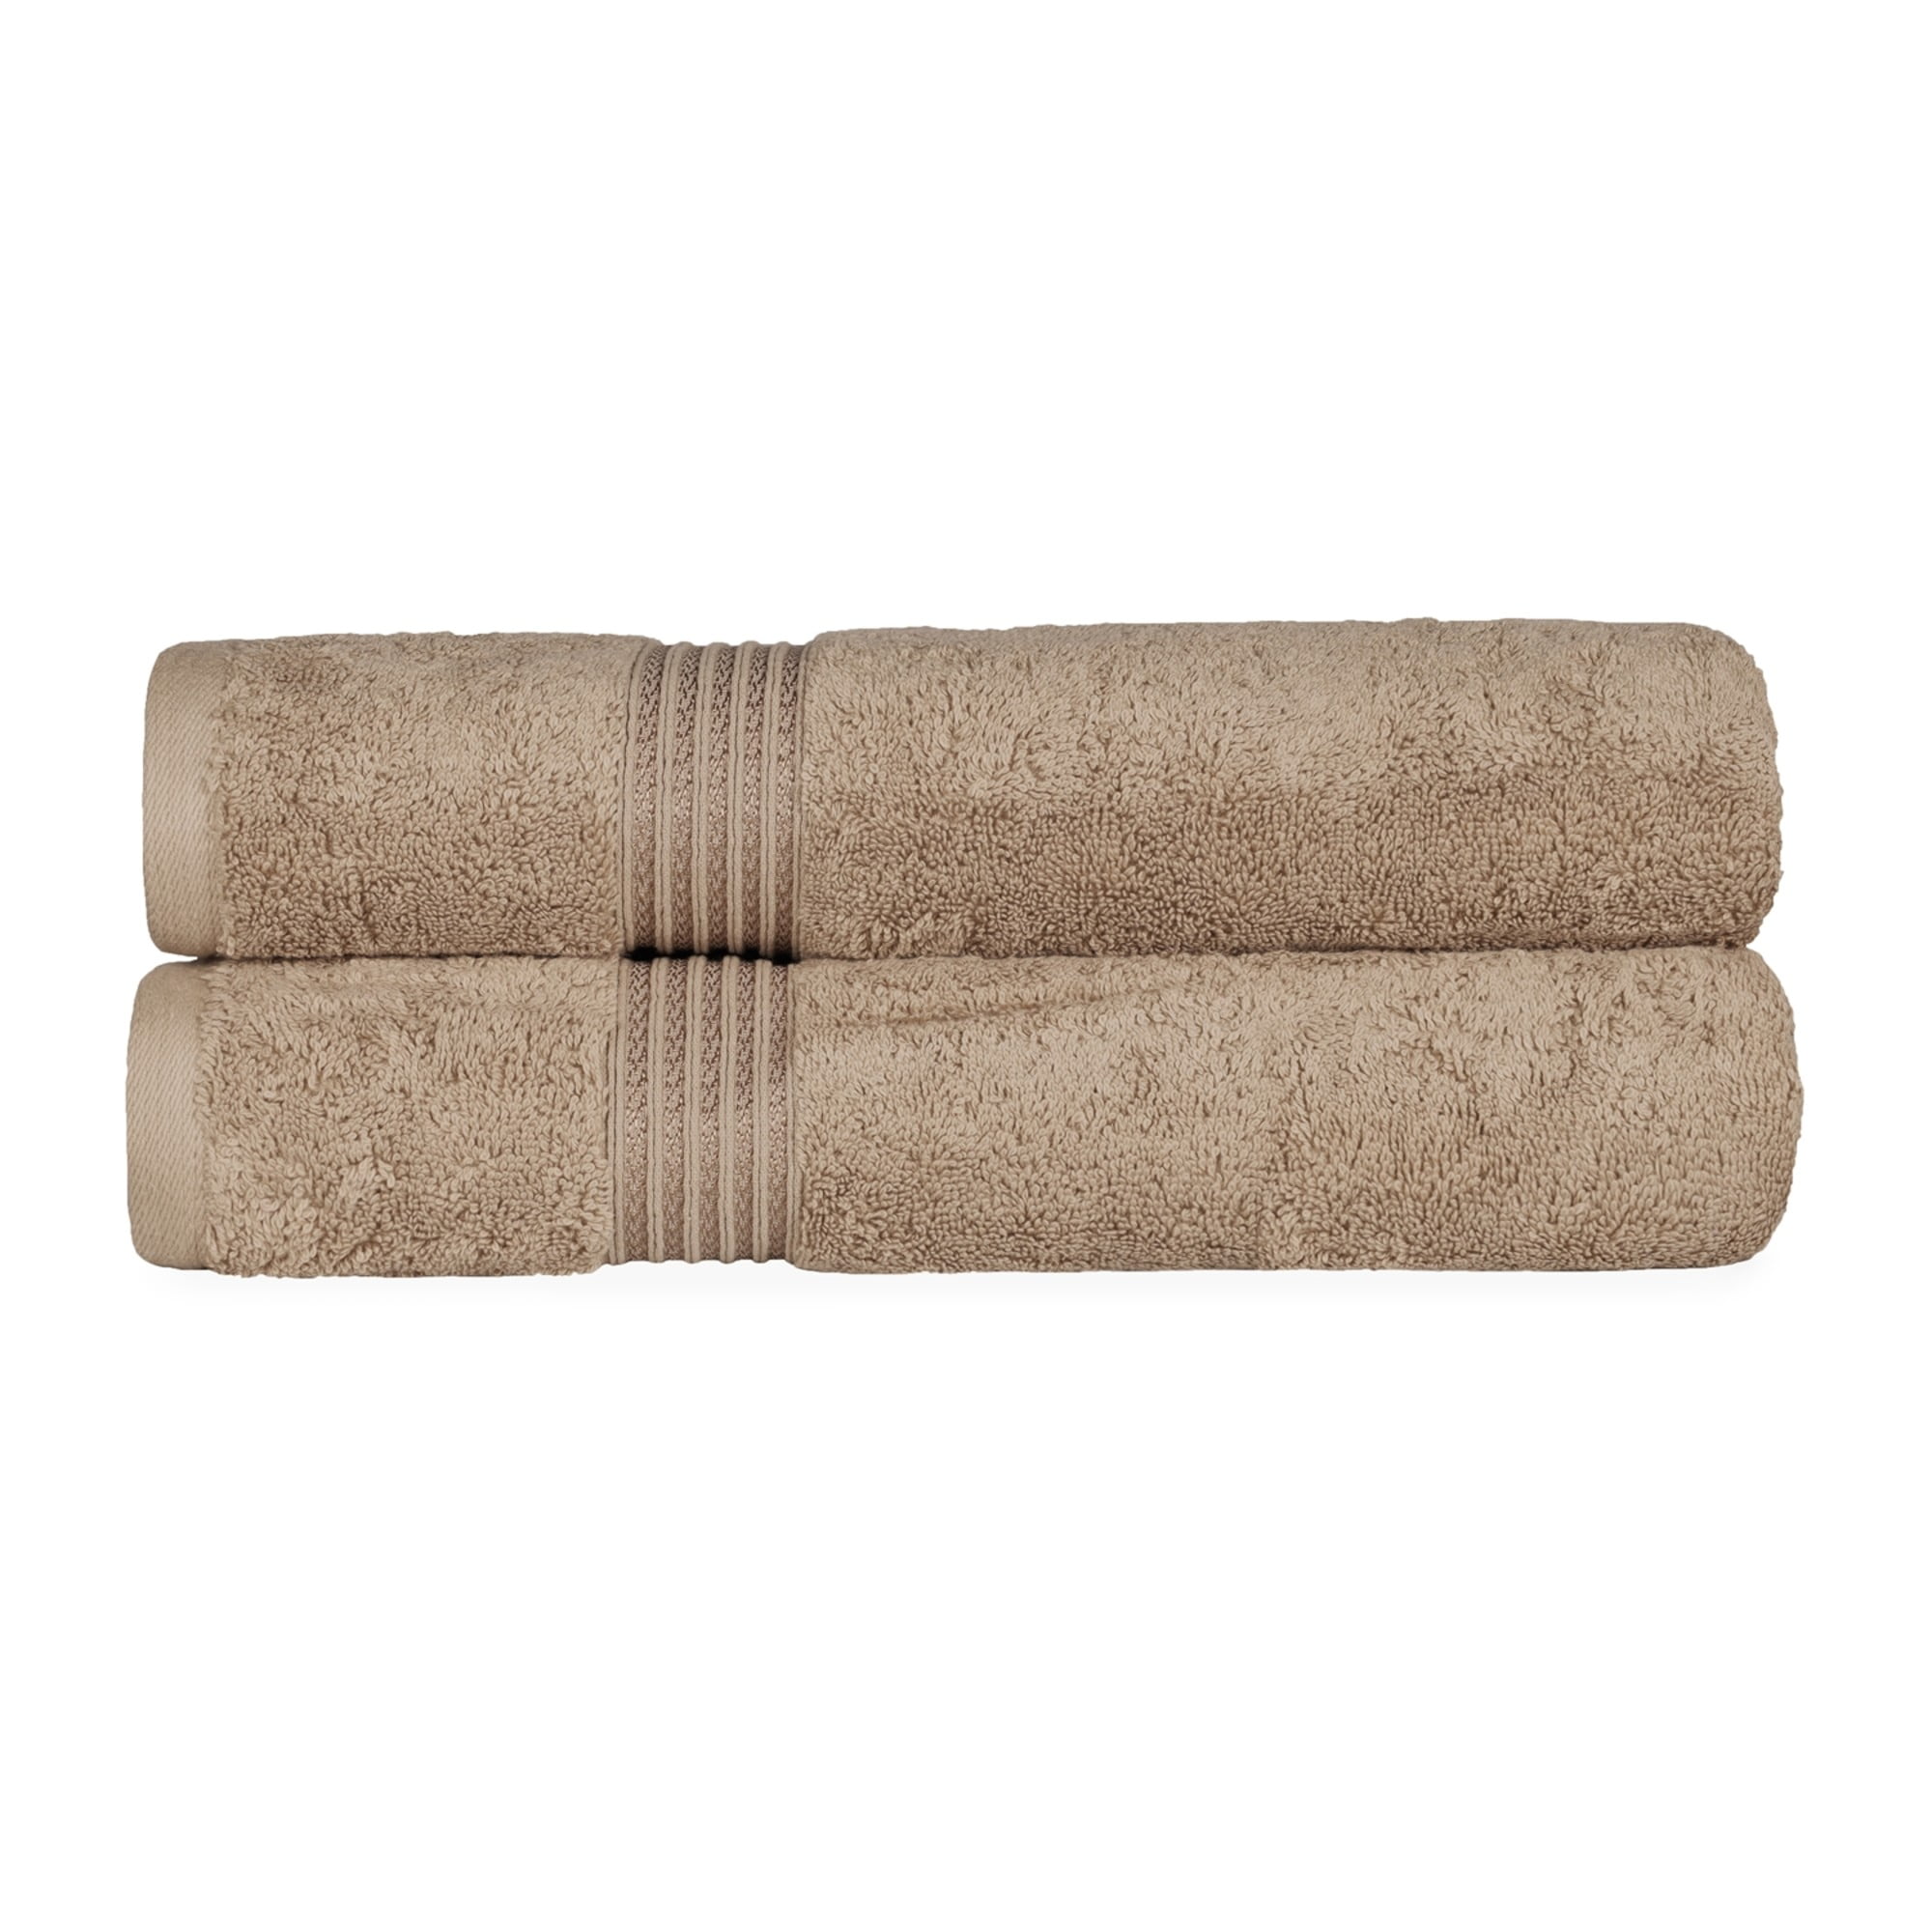 Long Staple Combed Egyptian Cotton Bath Sheet Set, Taupe, by Superior 